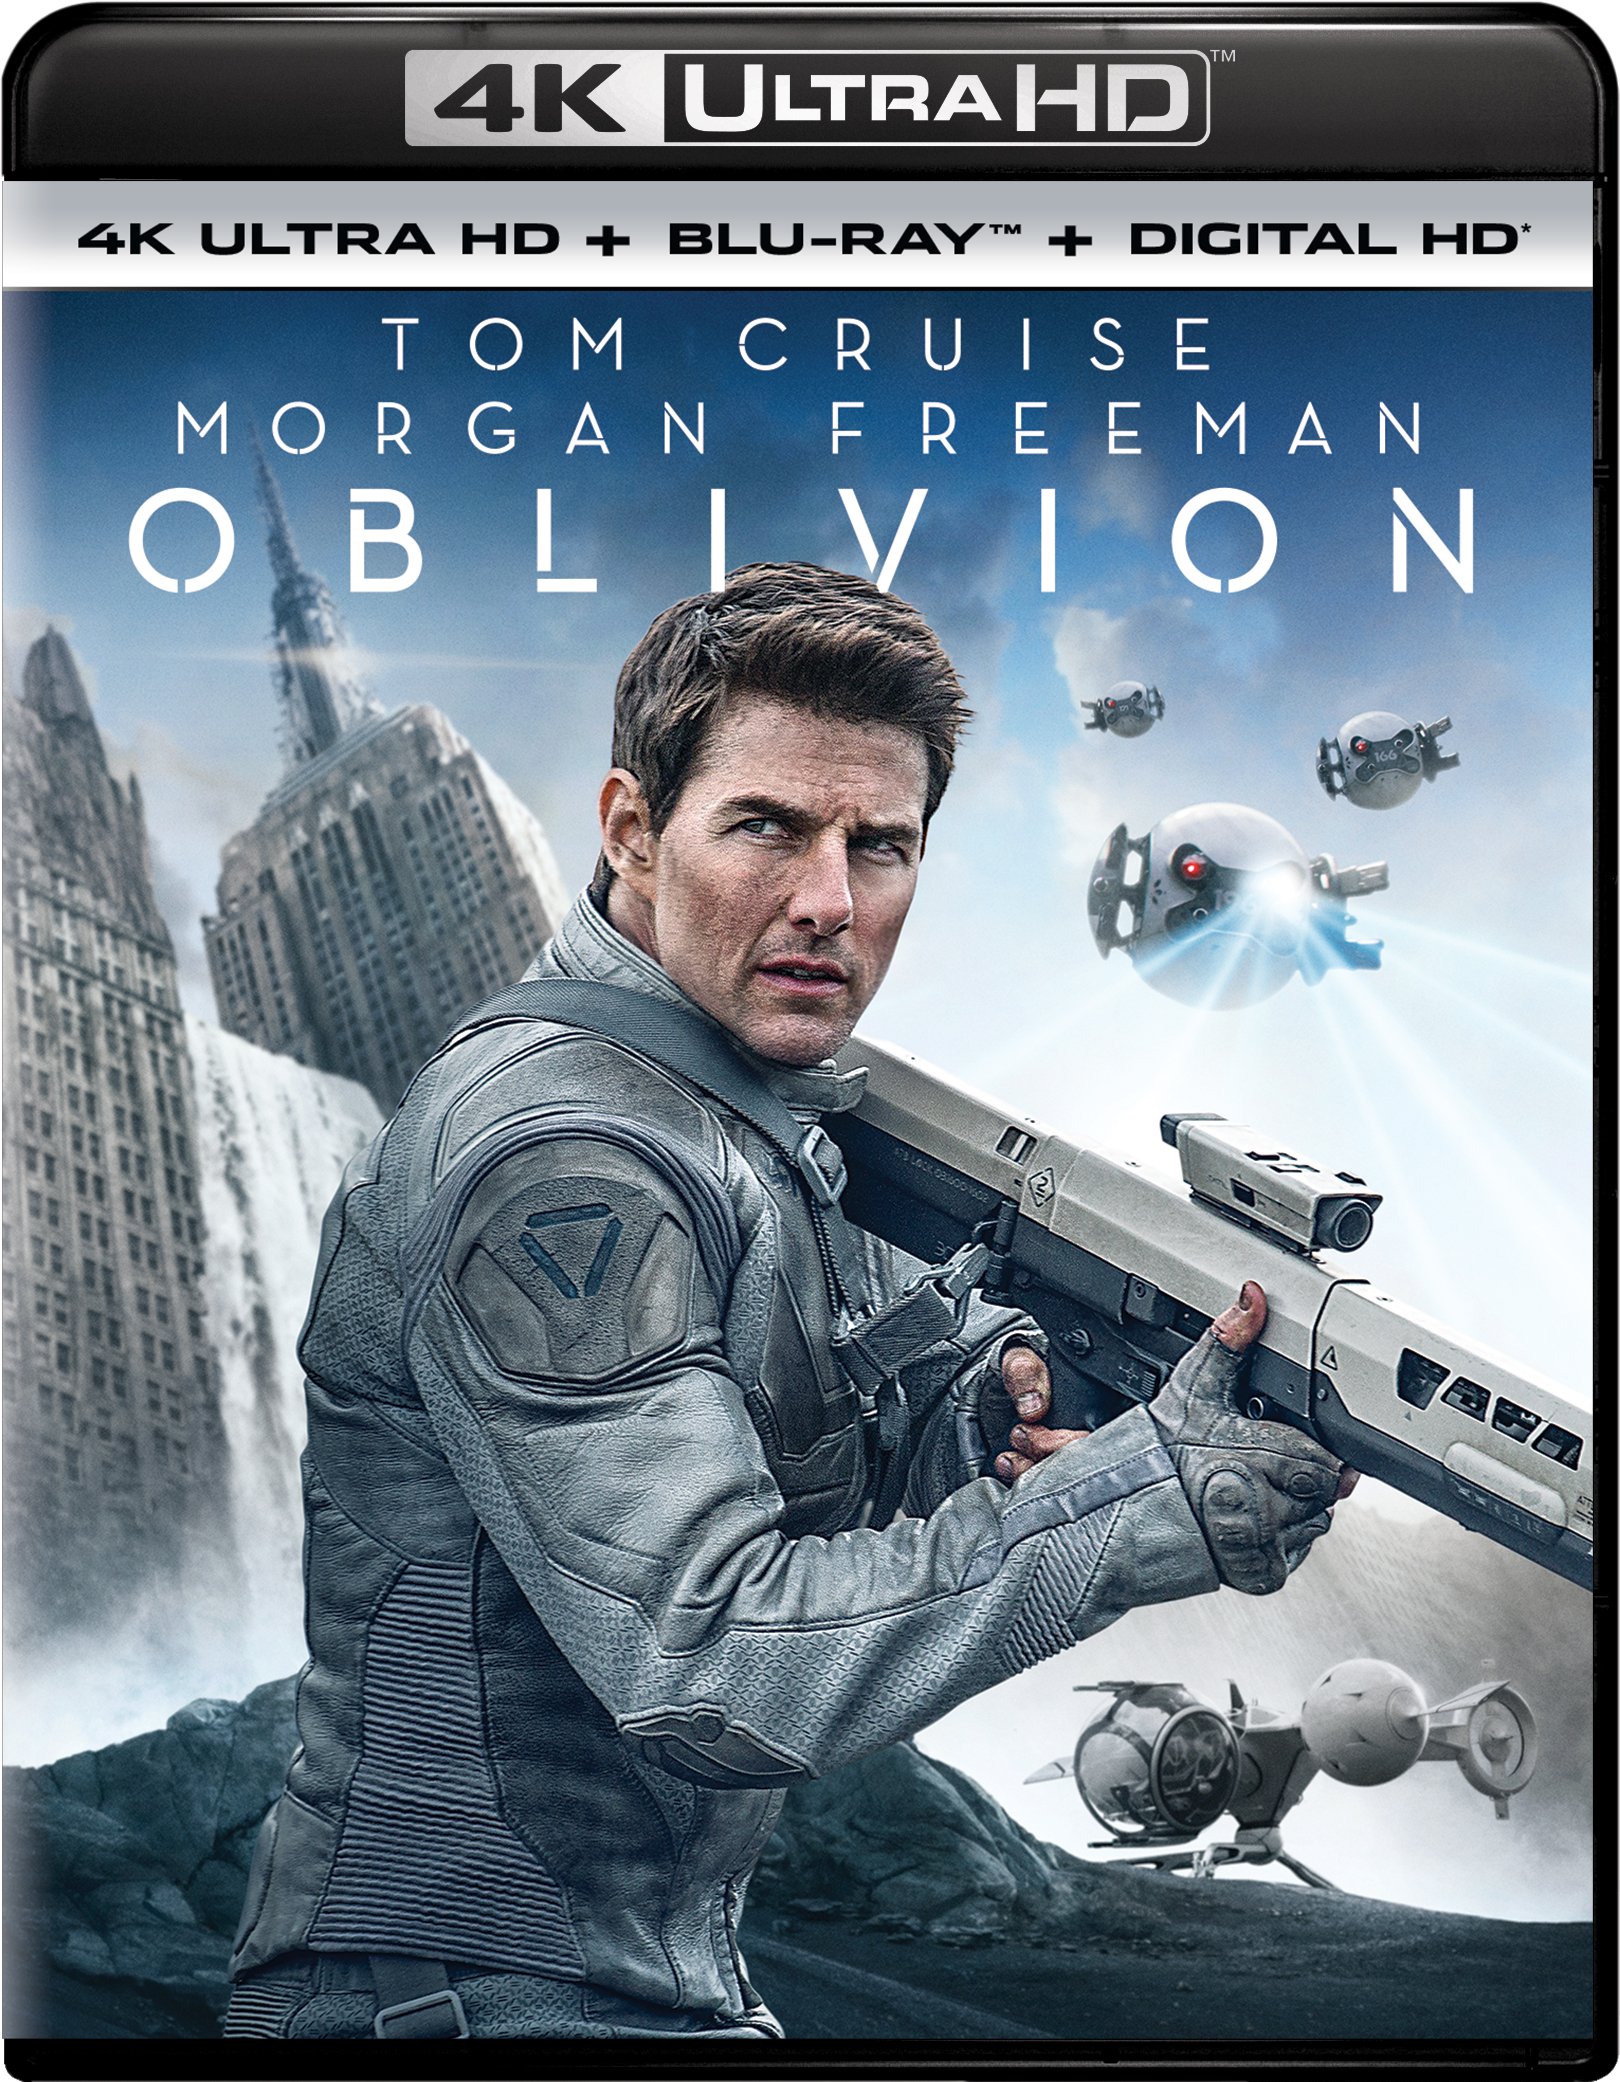 Oblivion Blu Ray Where To Watch This Movie Online